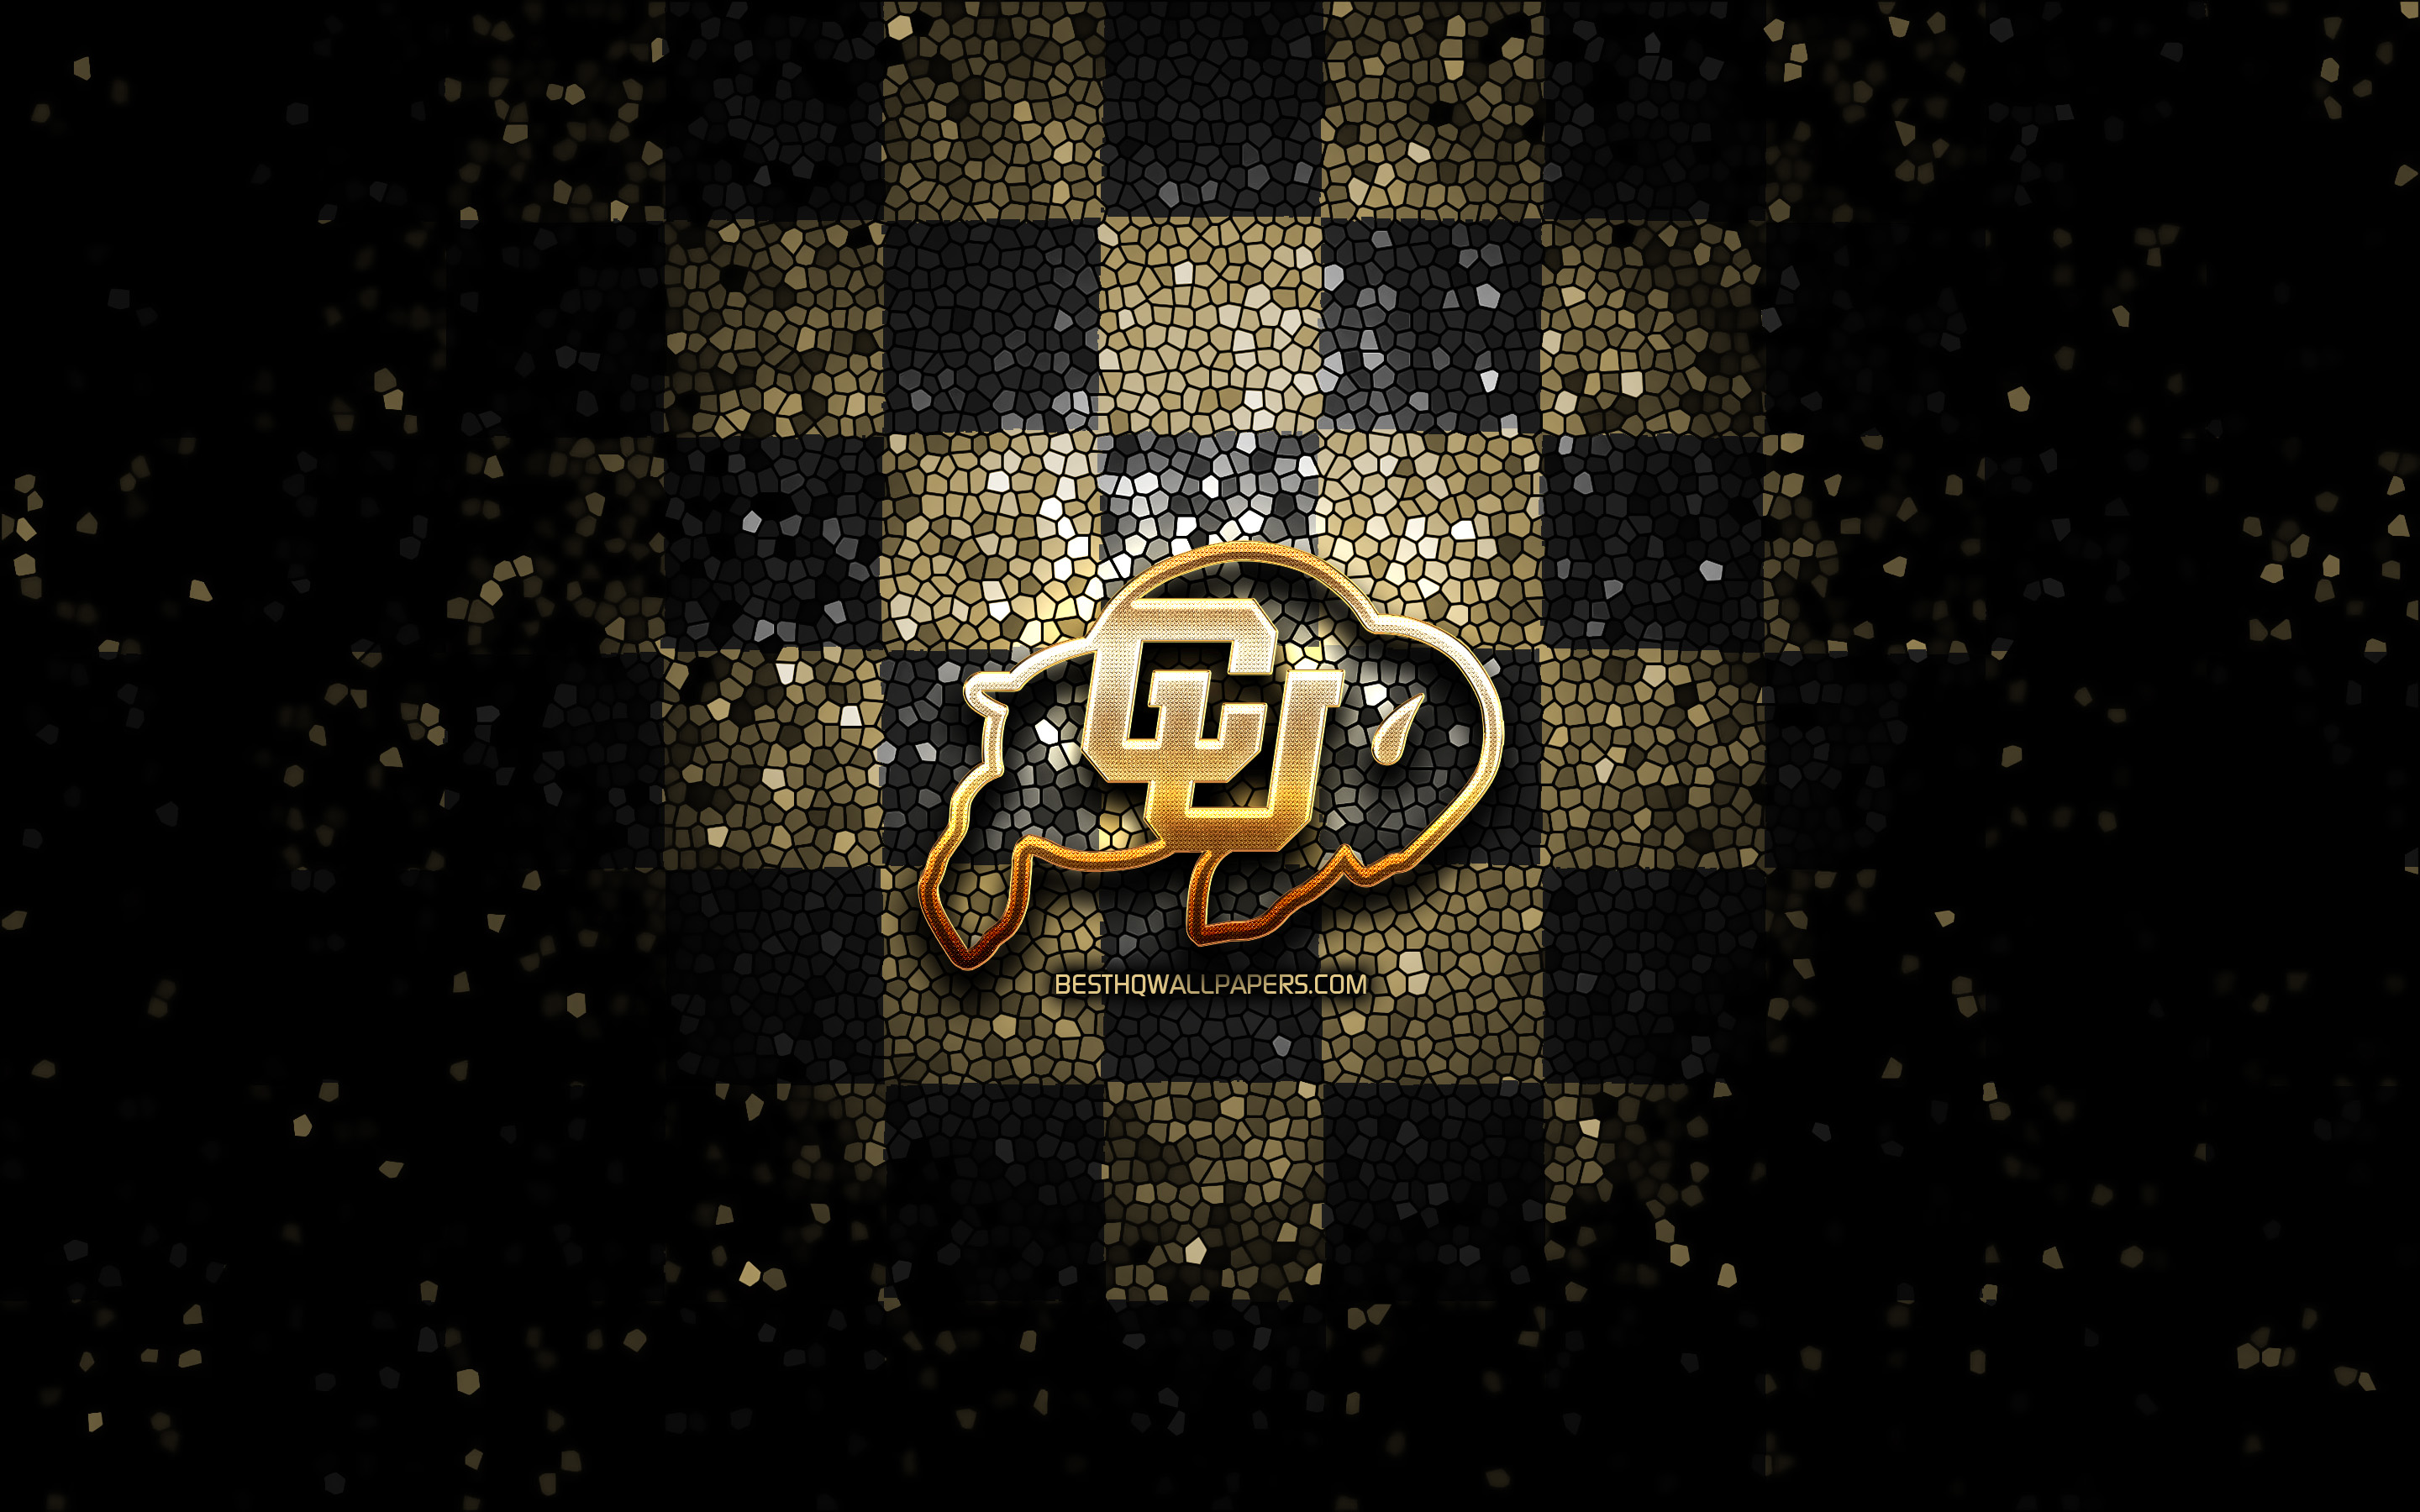 Download wallpaper Colorado Buffaloes, glitter logo, NCAA, brown black checkered background, USA, american football team, Colorado Buffaloes logo, mosaic art, american football, America for desktop with resolution 2880x1800. High Quality HD picture